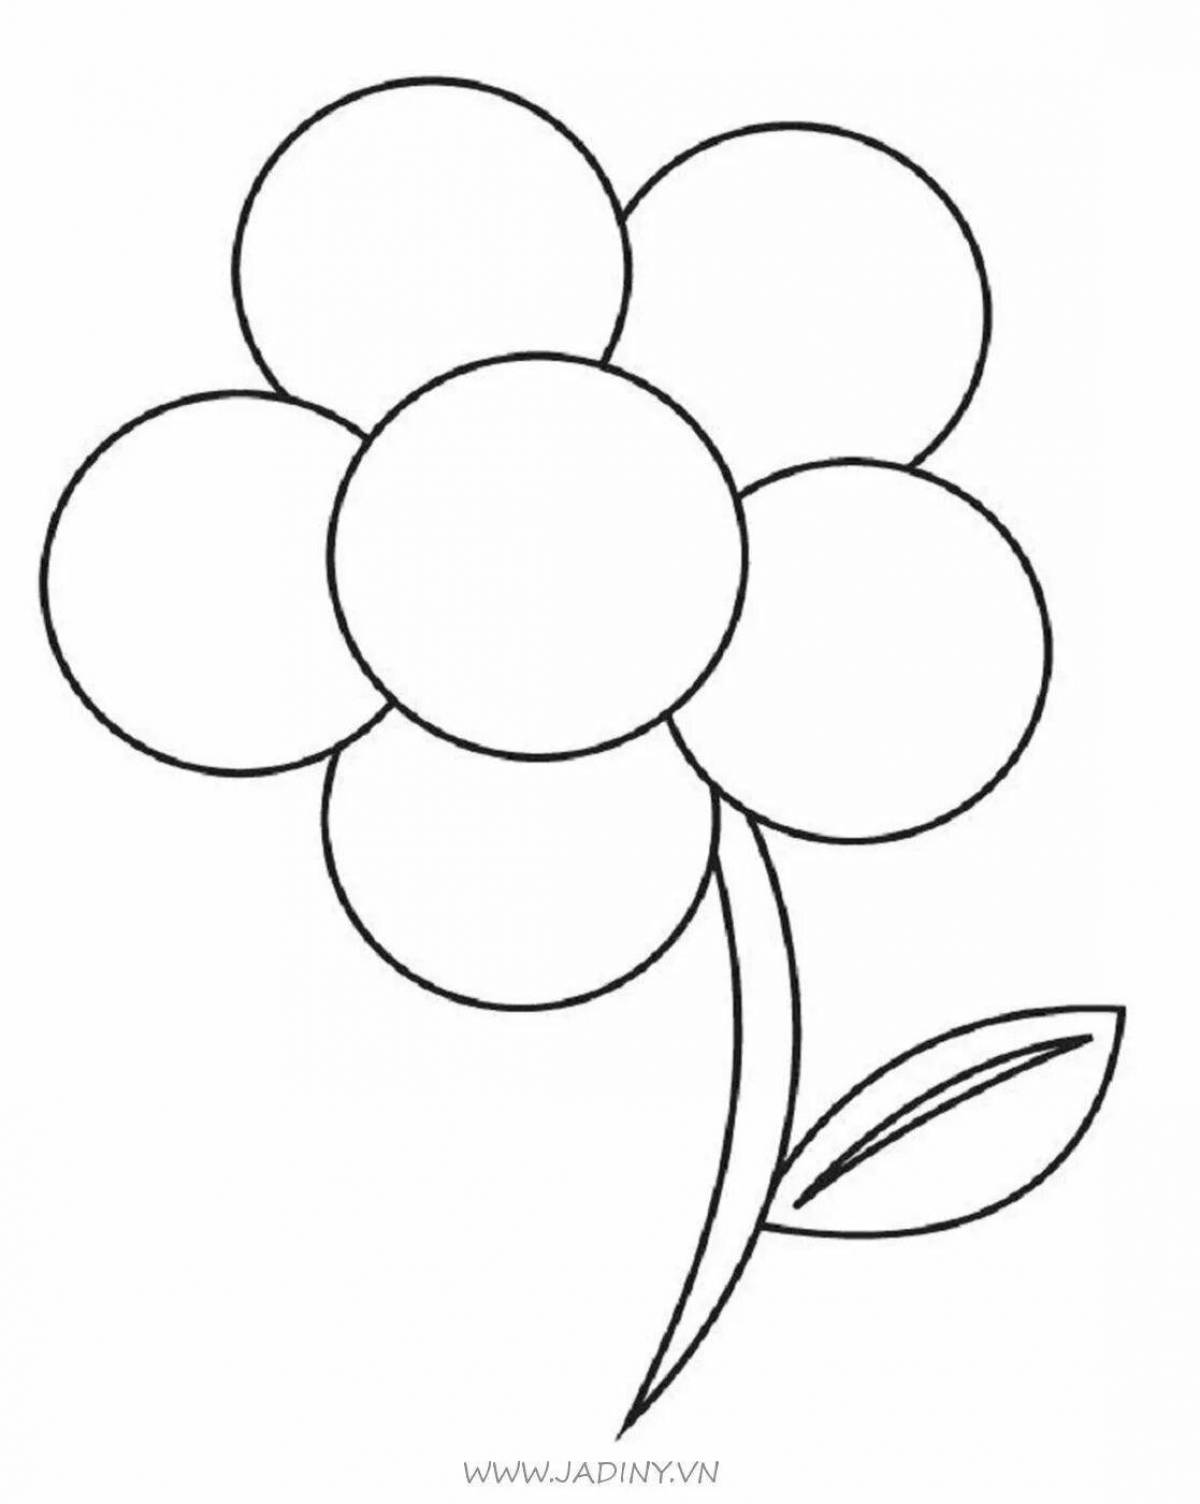 Fairytale coloring book for children 2-3 years old flower